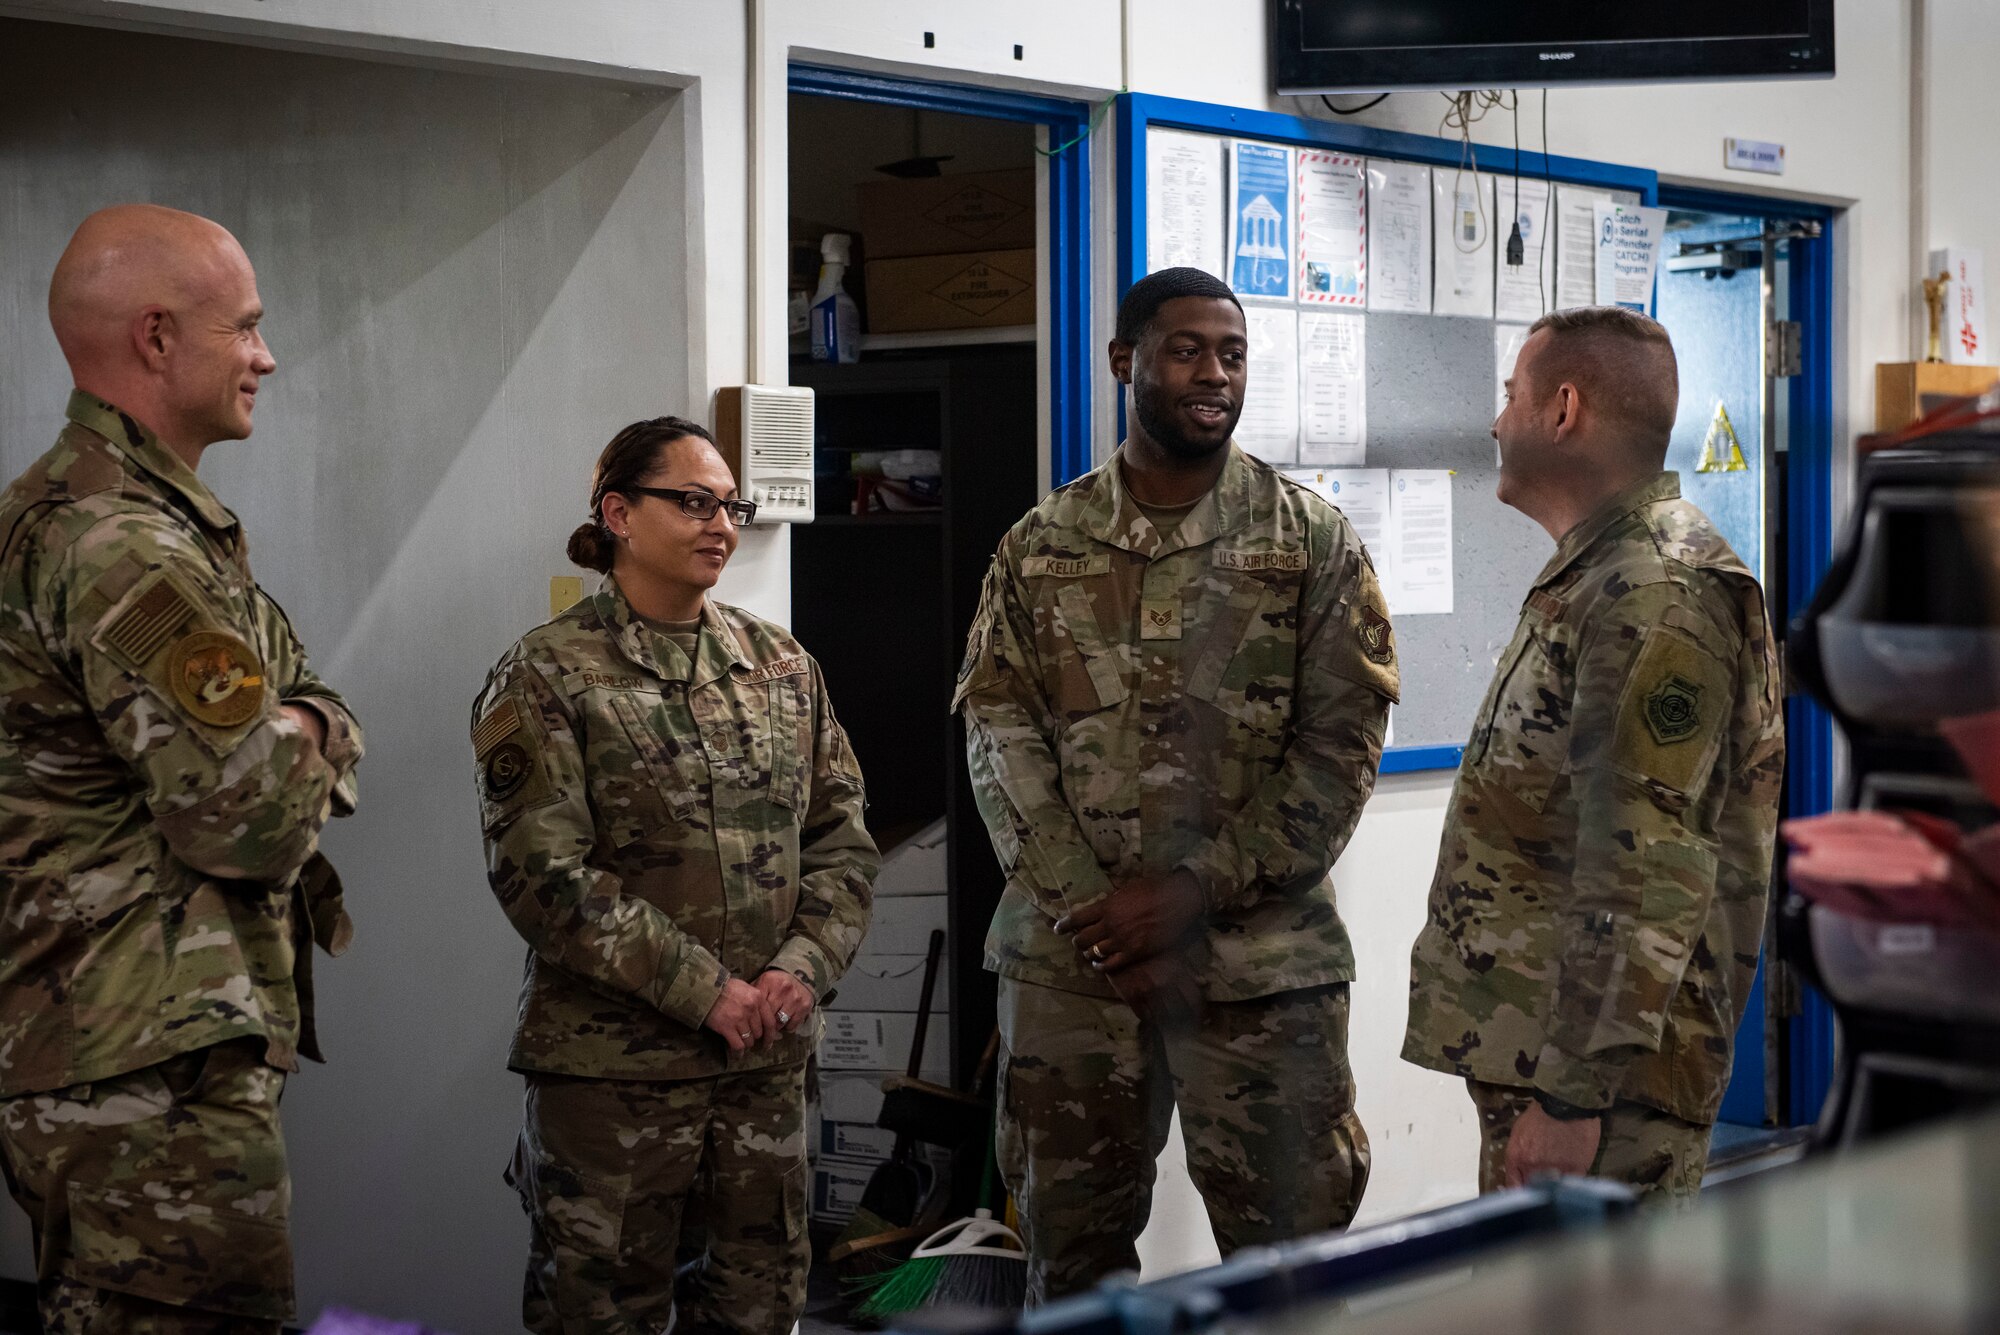 Group of military members in uniform talk in a post office.